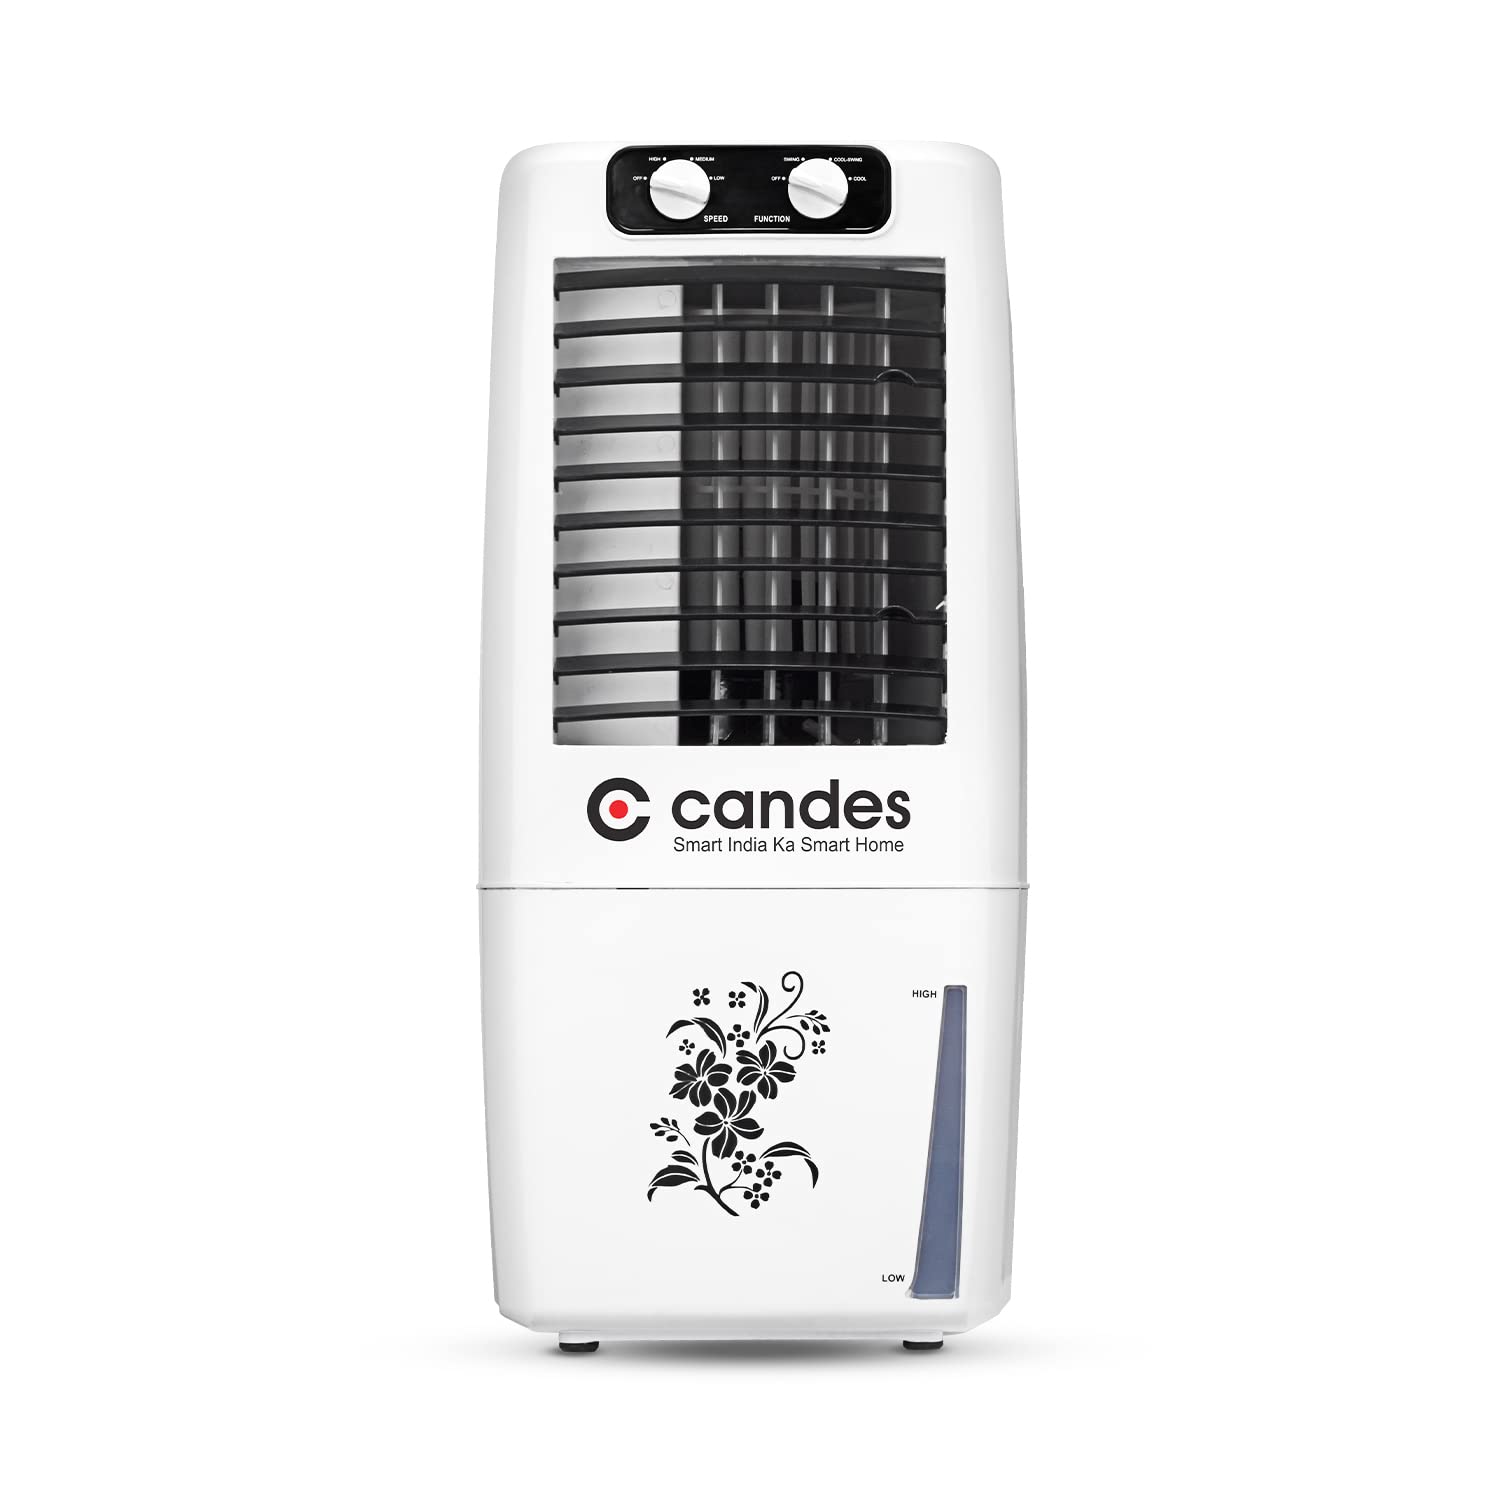 Candes 12 L Portable Mini Air Cooler for Home | High Speed Blower, Ice Chamber, 3 Way Speed Control | Inverter Compatible Air Cooler